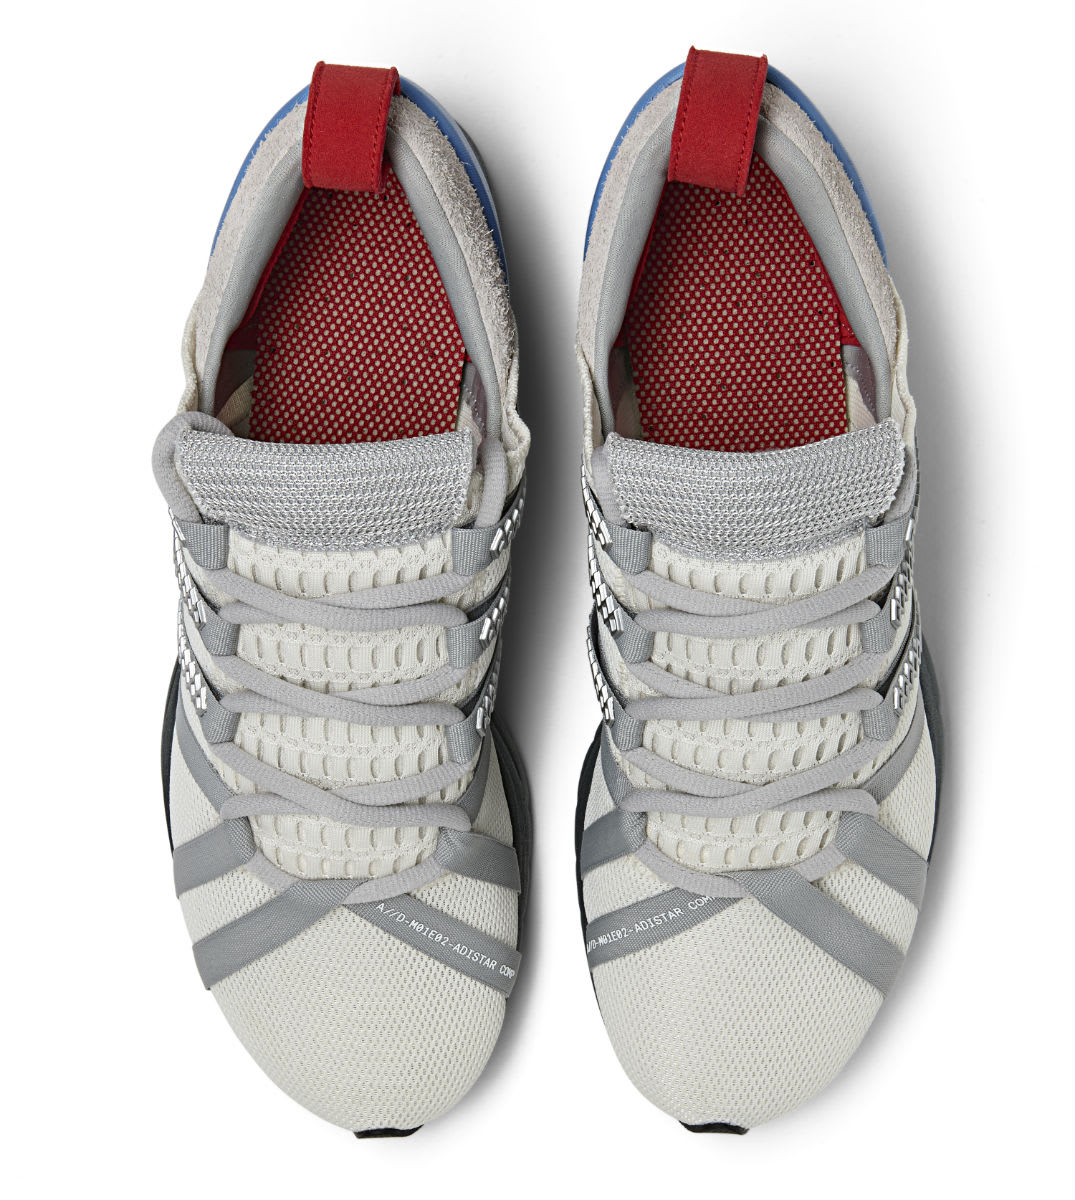 Adidas AdiStar Comp A//D Release Date Top BY9836